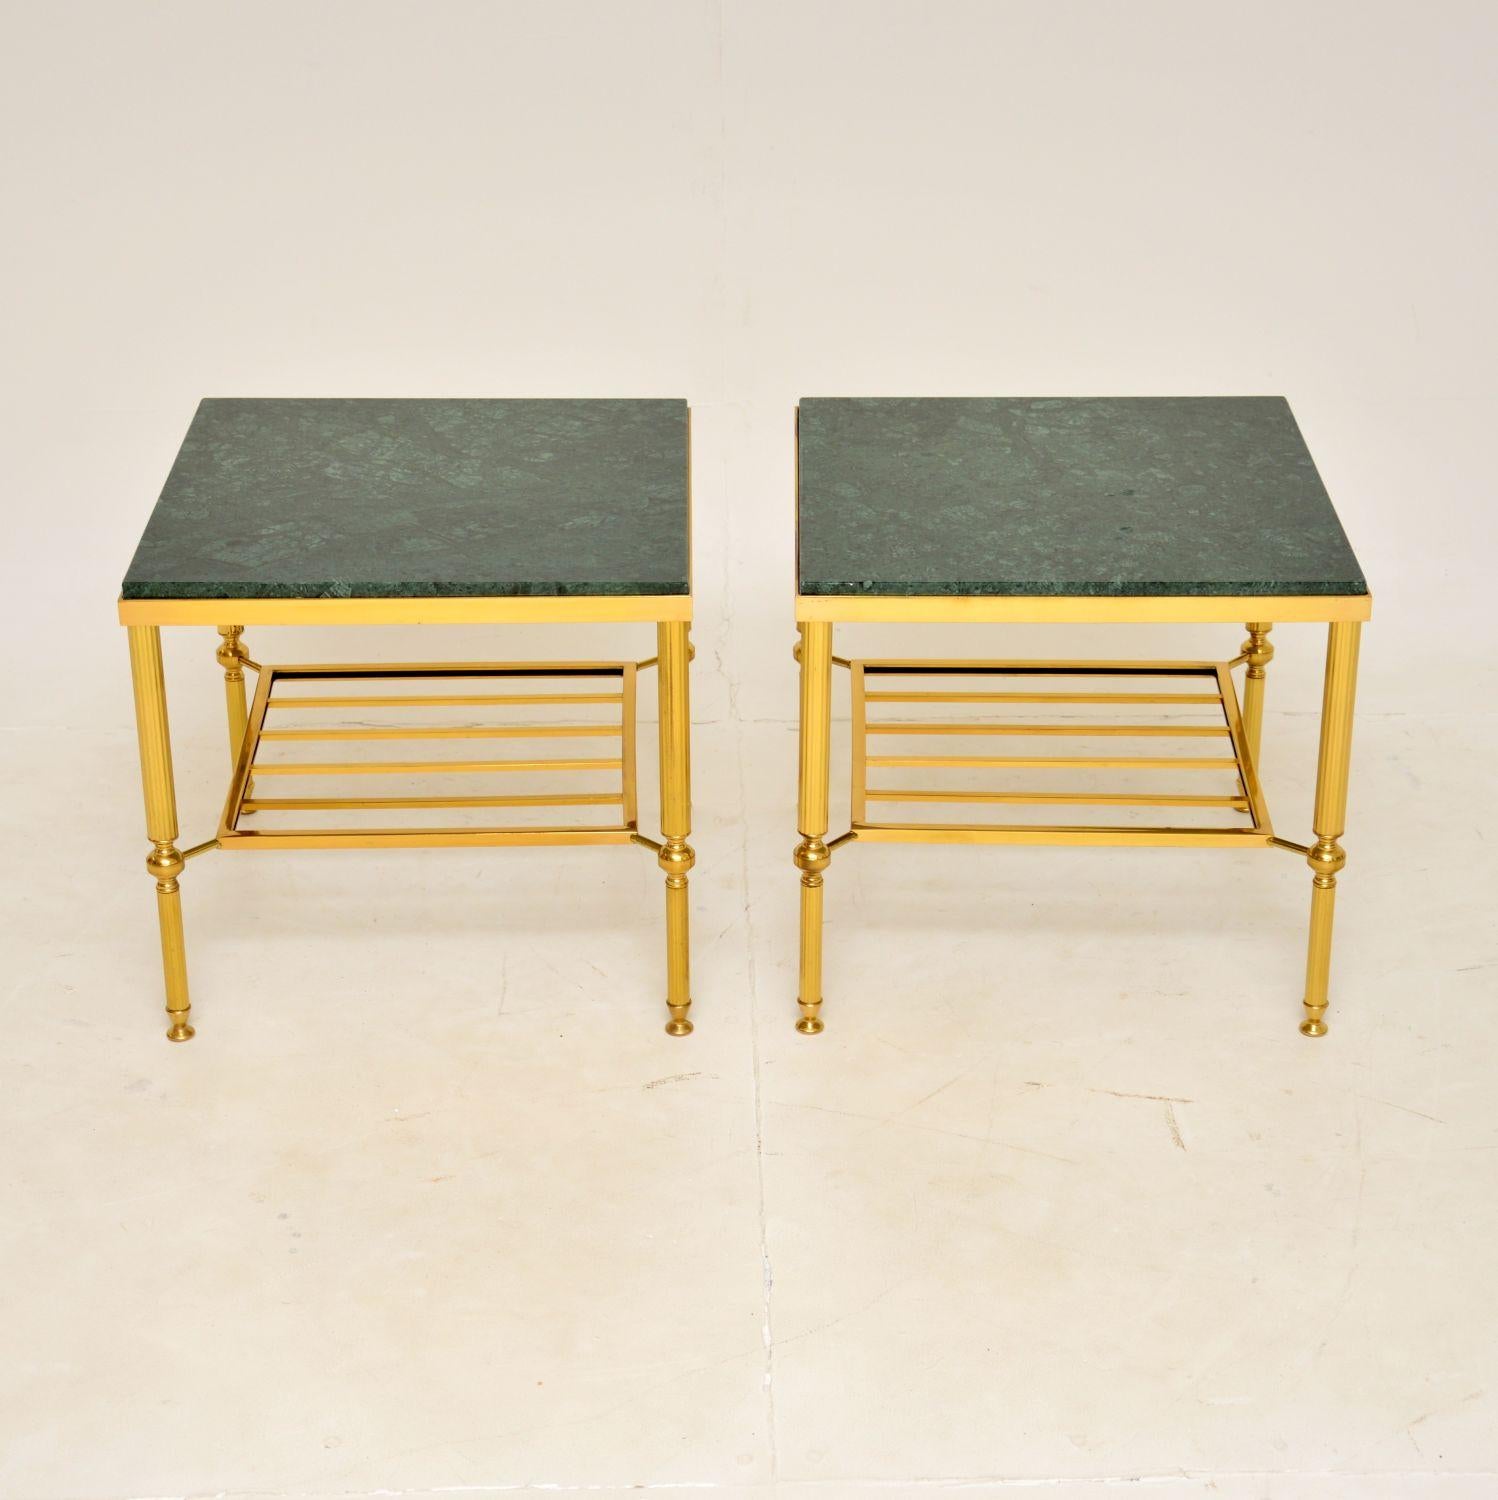 A stylish and extremely well made pair of vintage brass and marble side tables. They were made in Italy, and date from the 1960-70’s.

The quality is fantastic, they are a very useful size with a handy lower tier. We have had the green marble tops